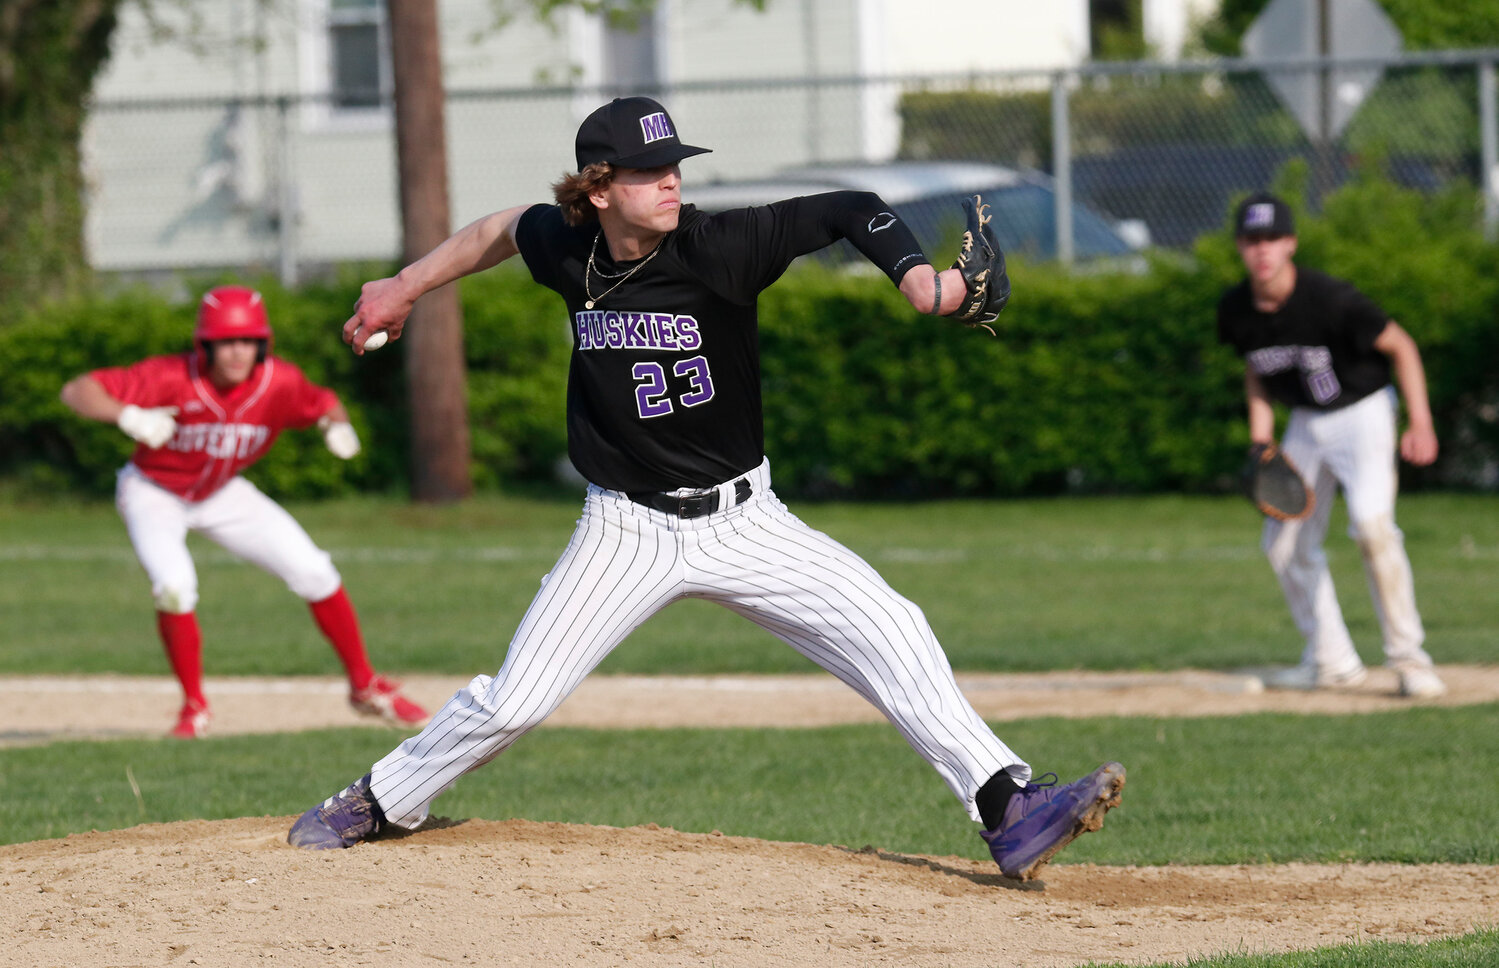 Brad Denson makes a pitch during the team’s game against Coventry. The Huskies will host Central in a Division I preliminary round playoff game at Guiteras Field on Tuesday at 4 p.m.